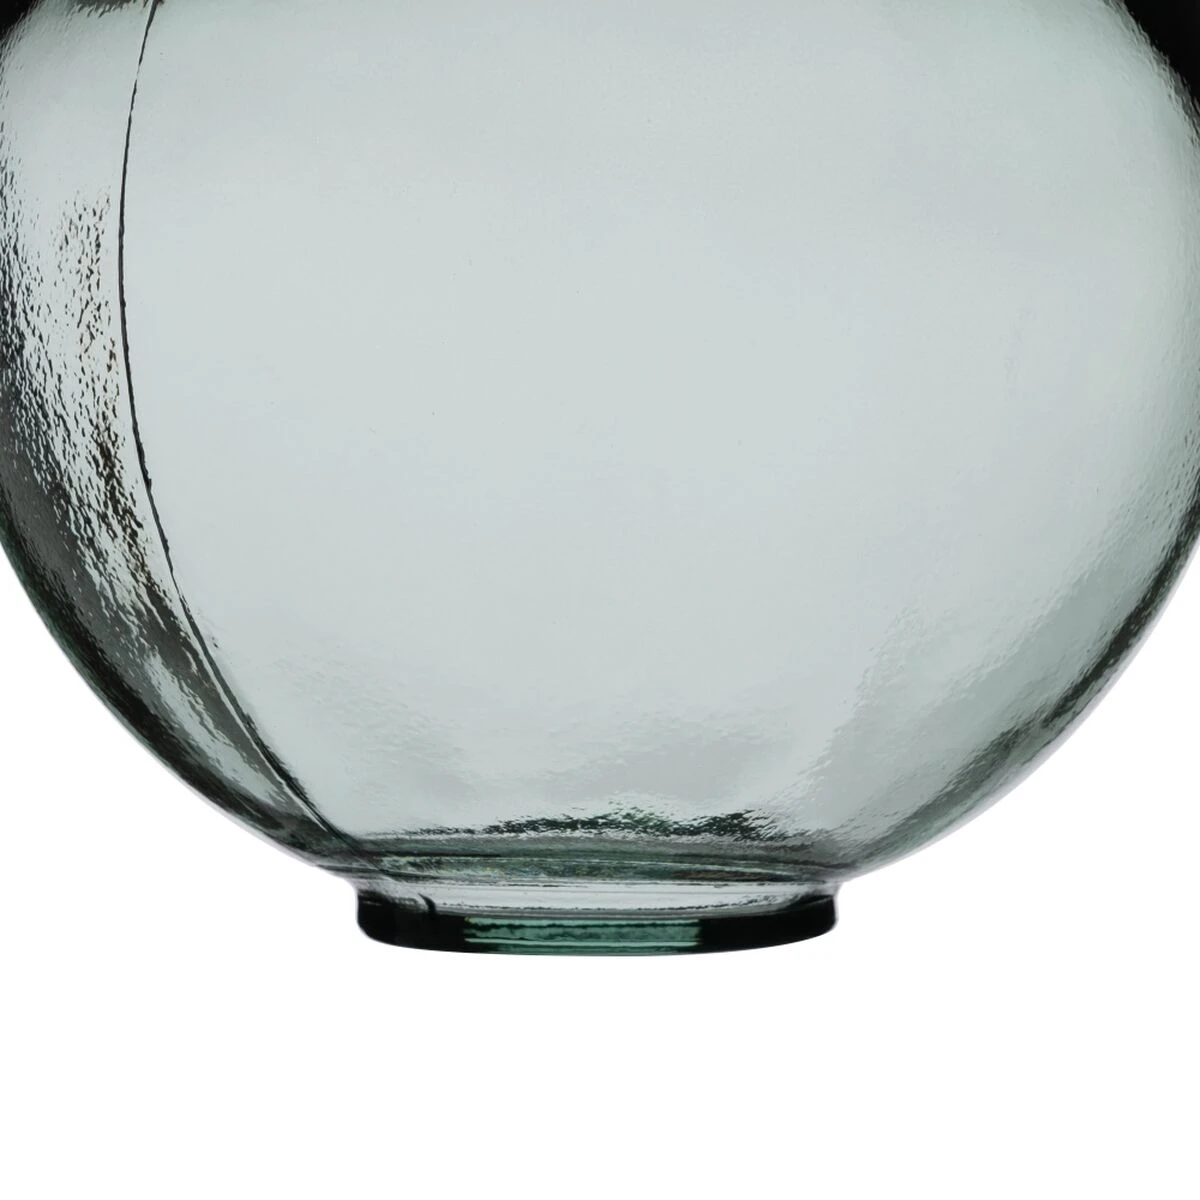 Clear glass vase